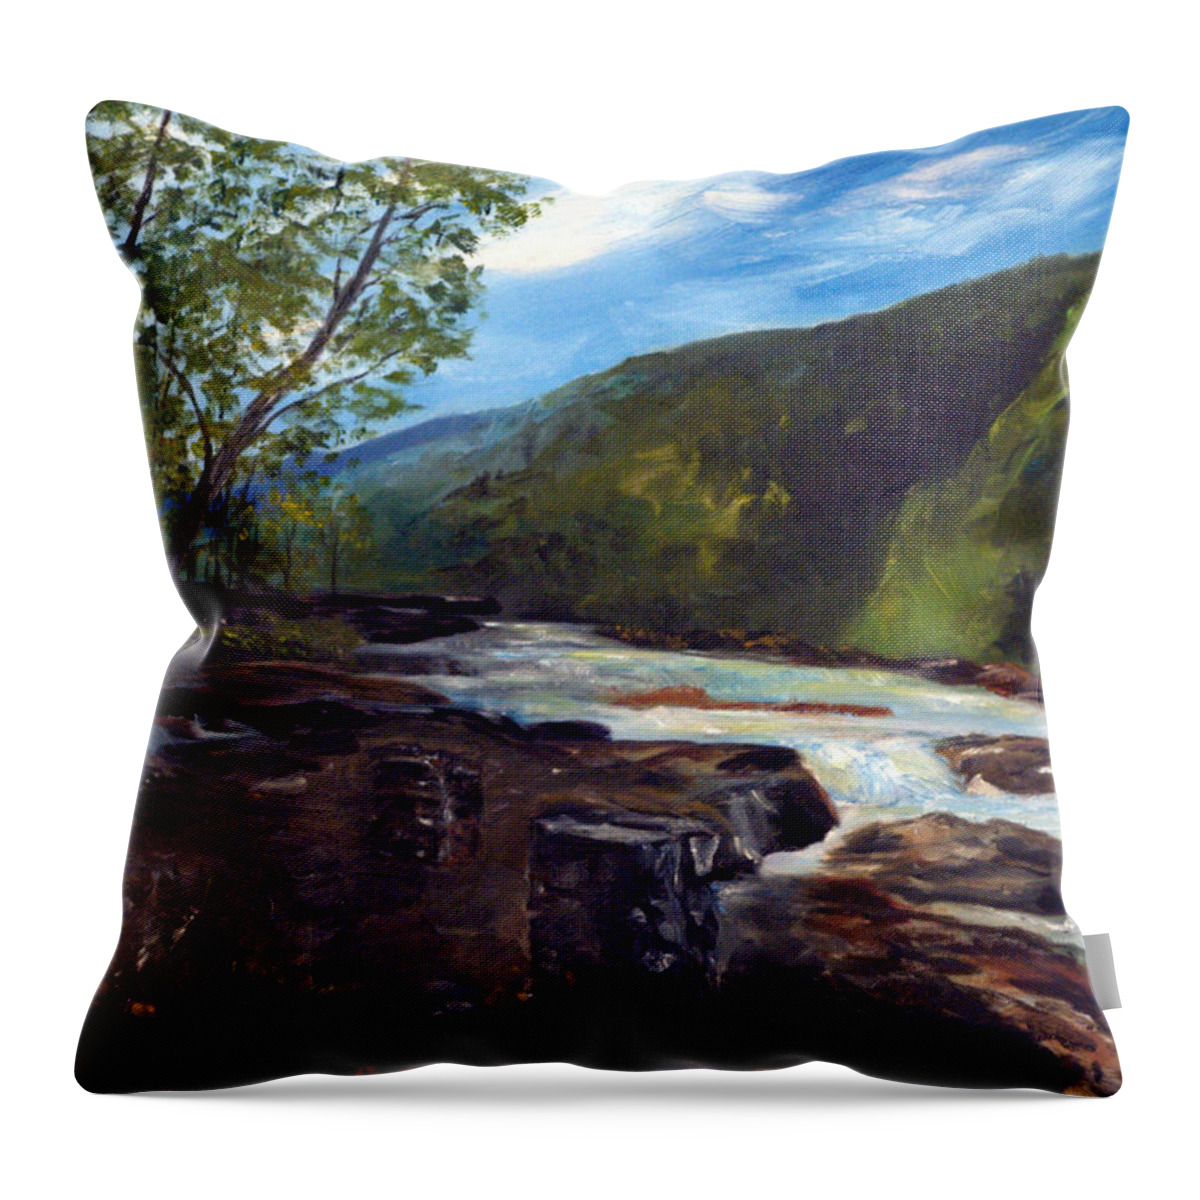 Webster Springs Stream Throw Pillow featuring the painting Webster Springs Stream by Phil Burton